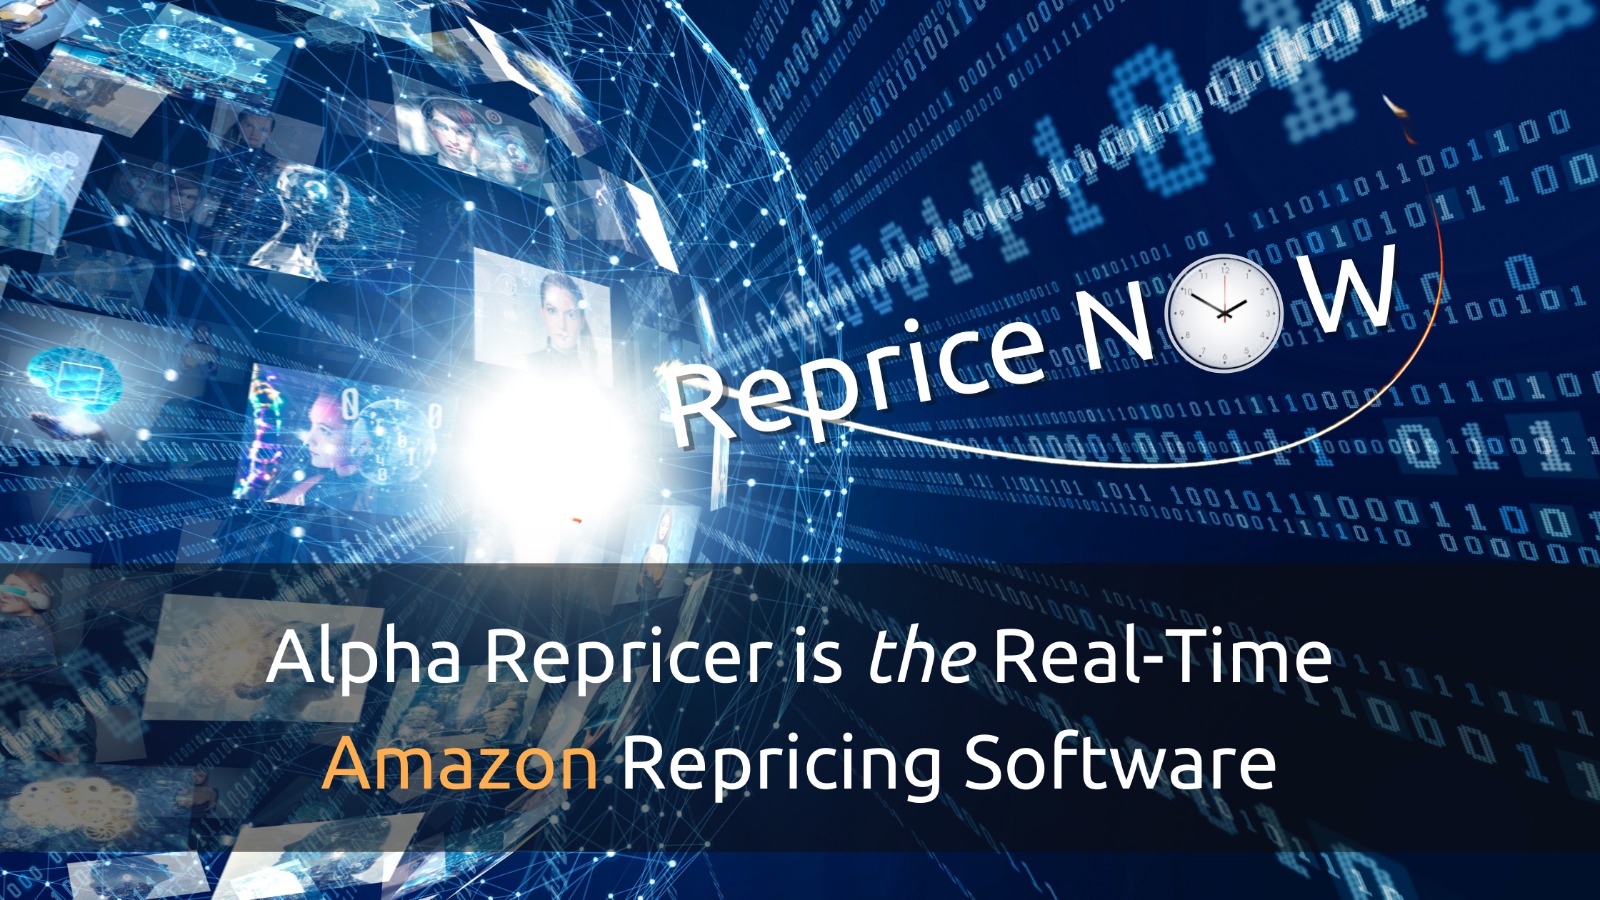 Alpha Repricer is the Real-time Amazon repricing software